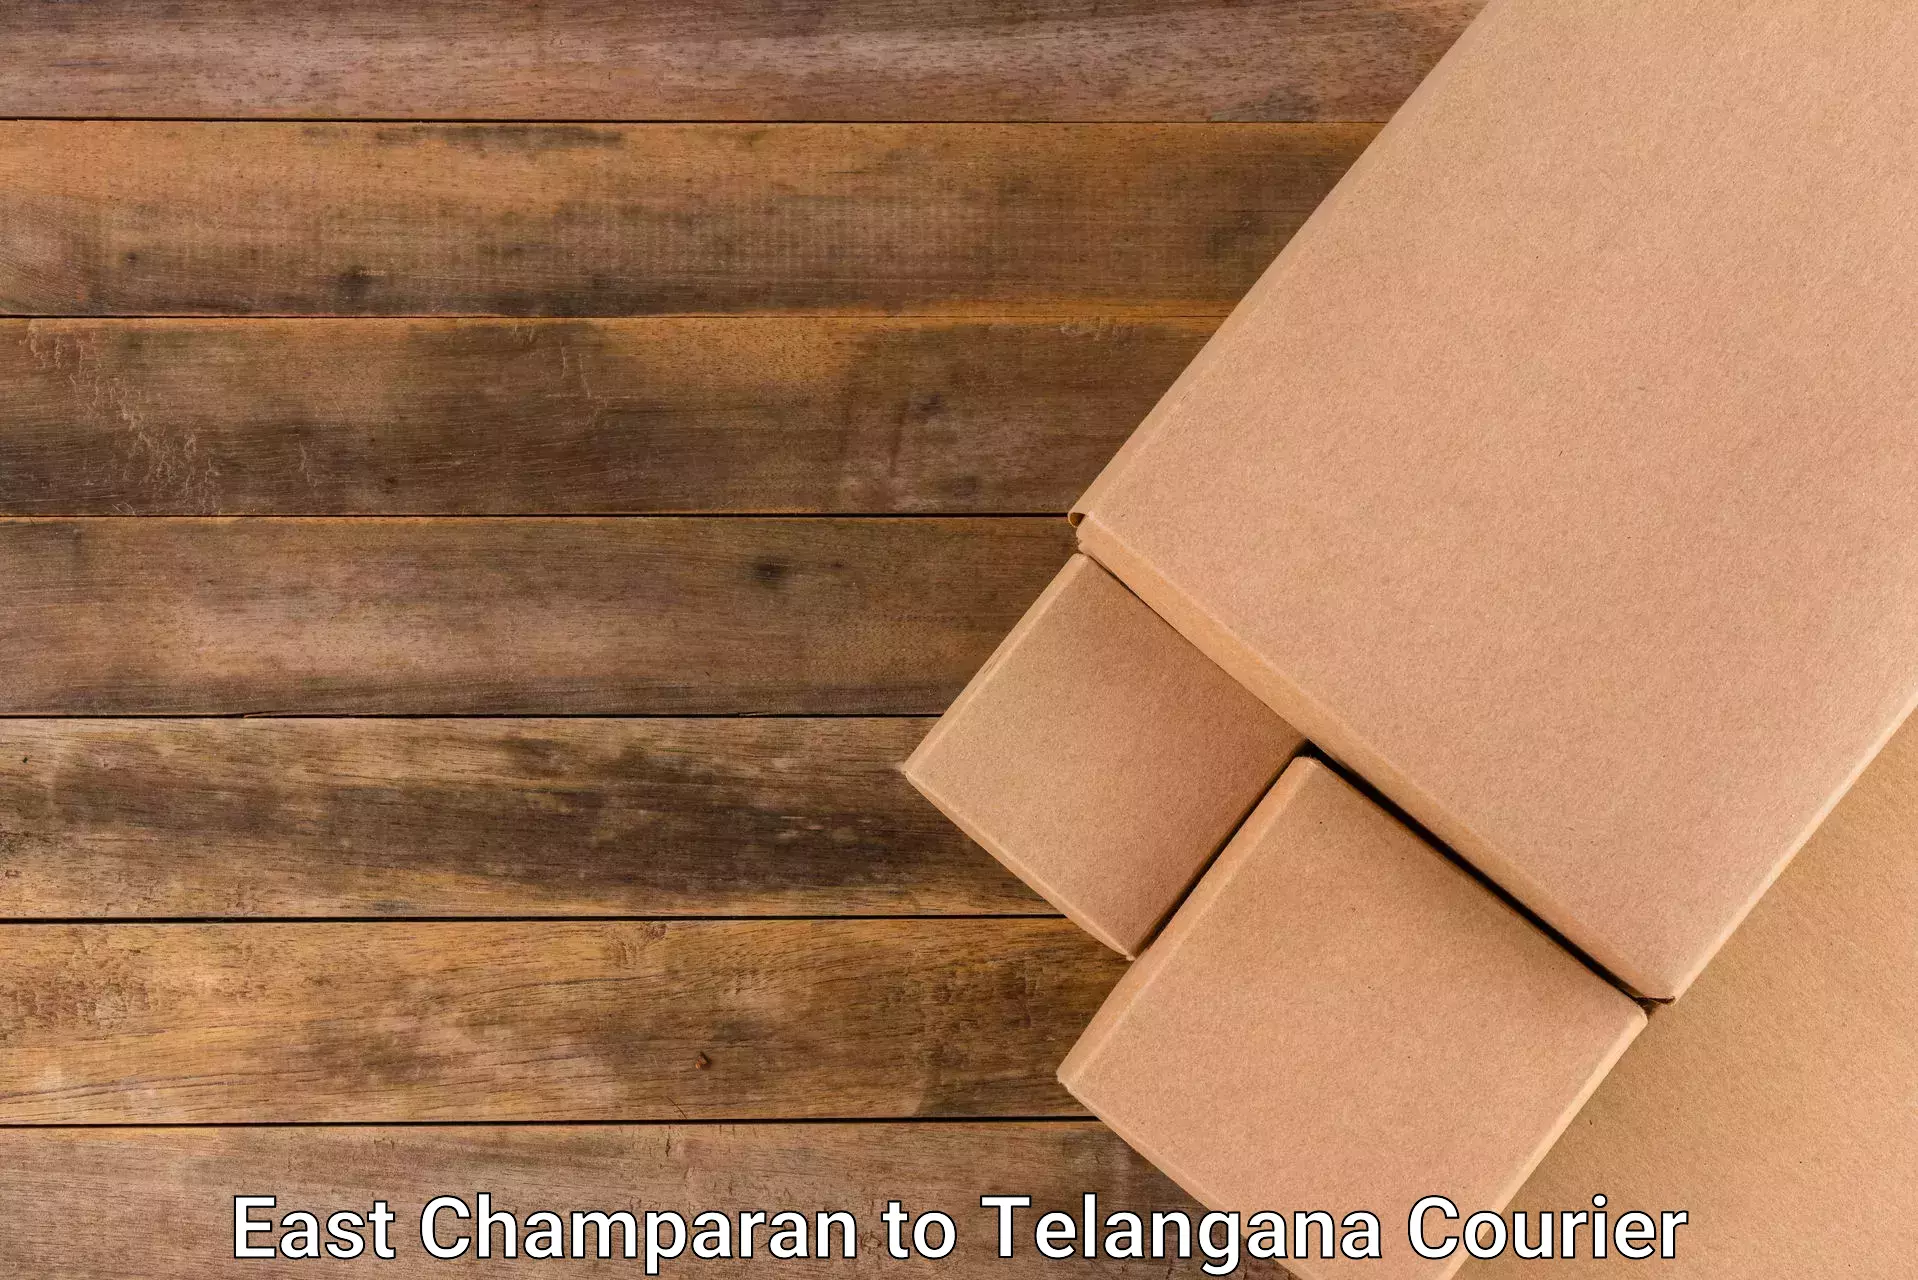 Optimized shipping services East Champaran to Manneguda